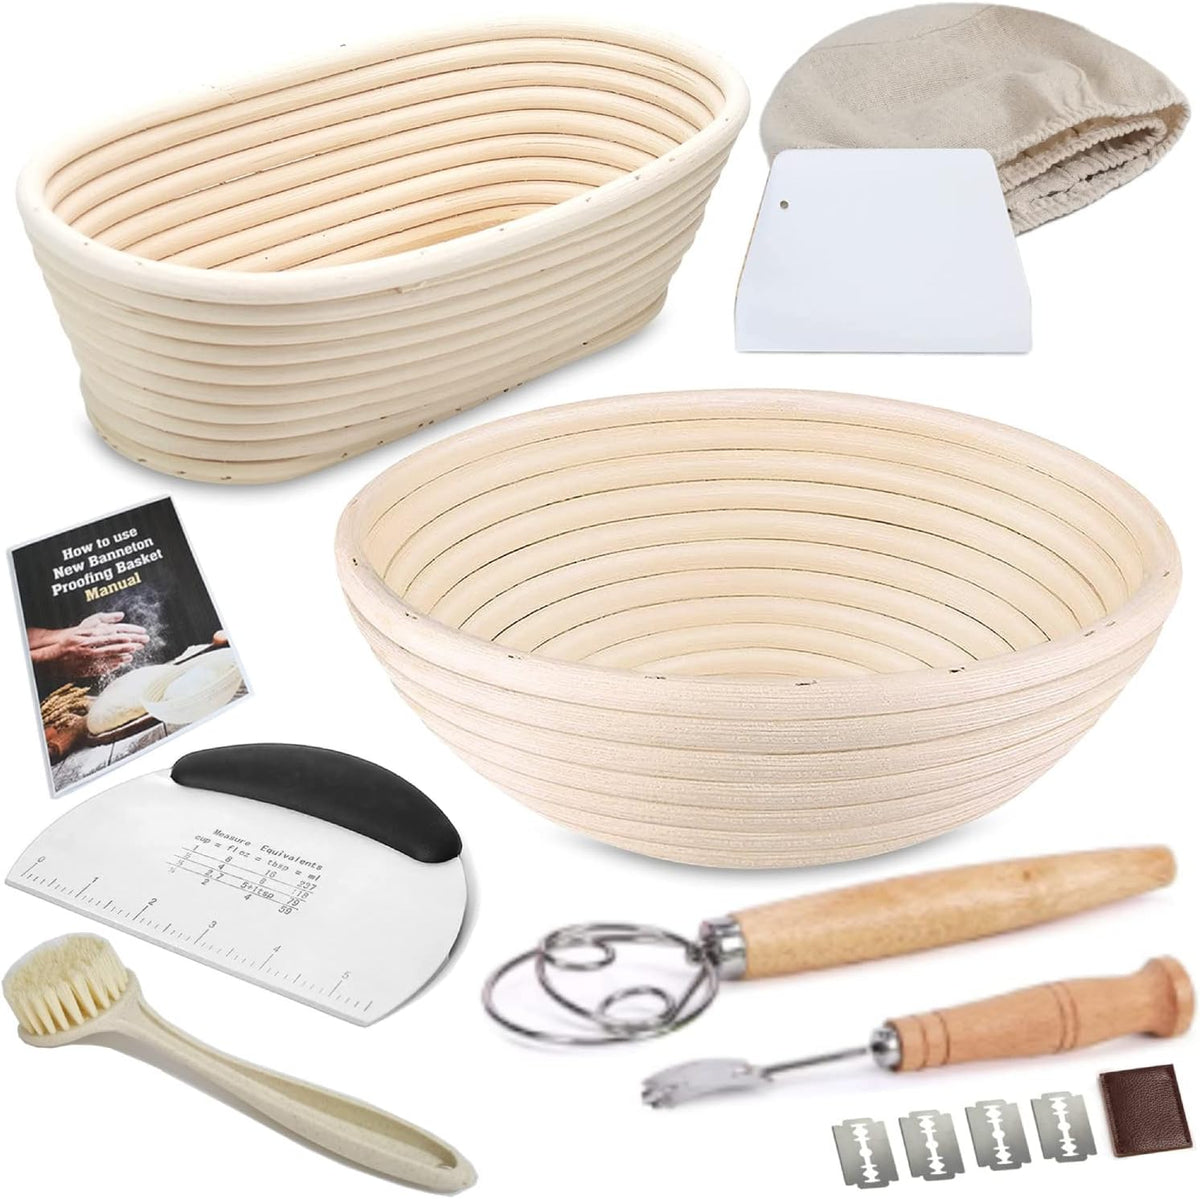 RFAQK Bread Proofing Baskets for Sourdough & Sourdough Kit, Round and Oval ( UPC: 198168520093 )